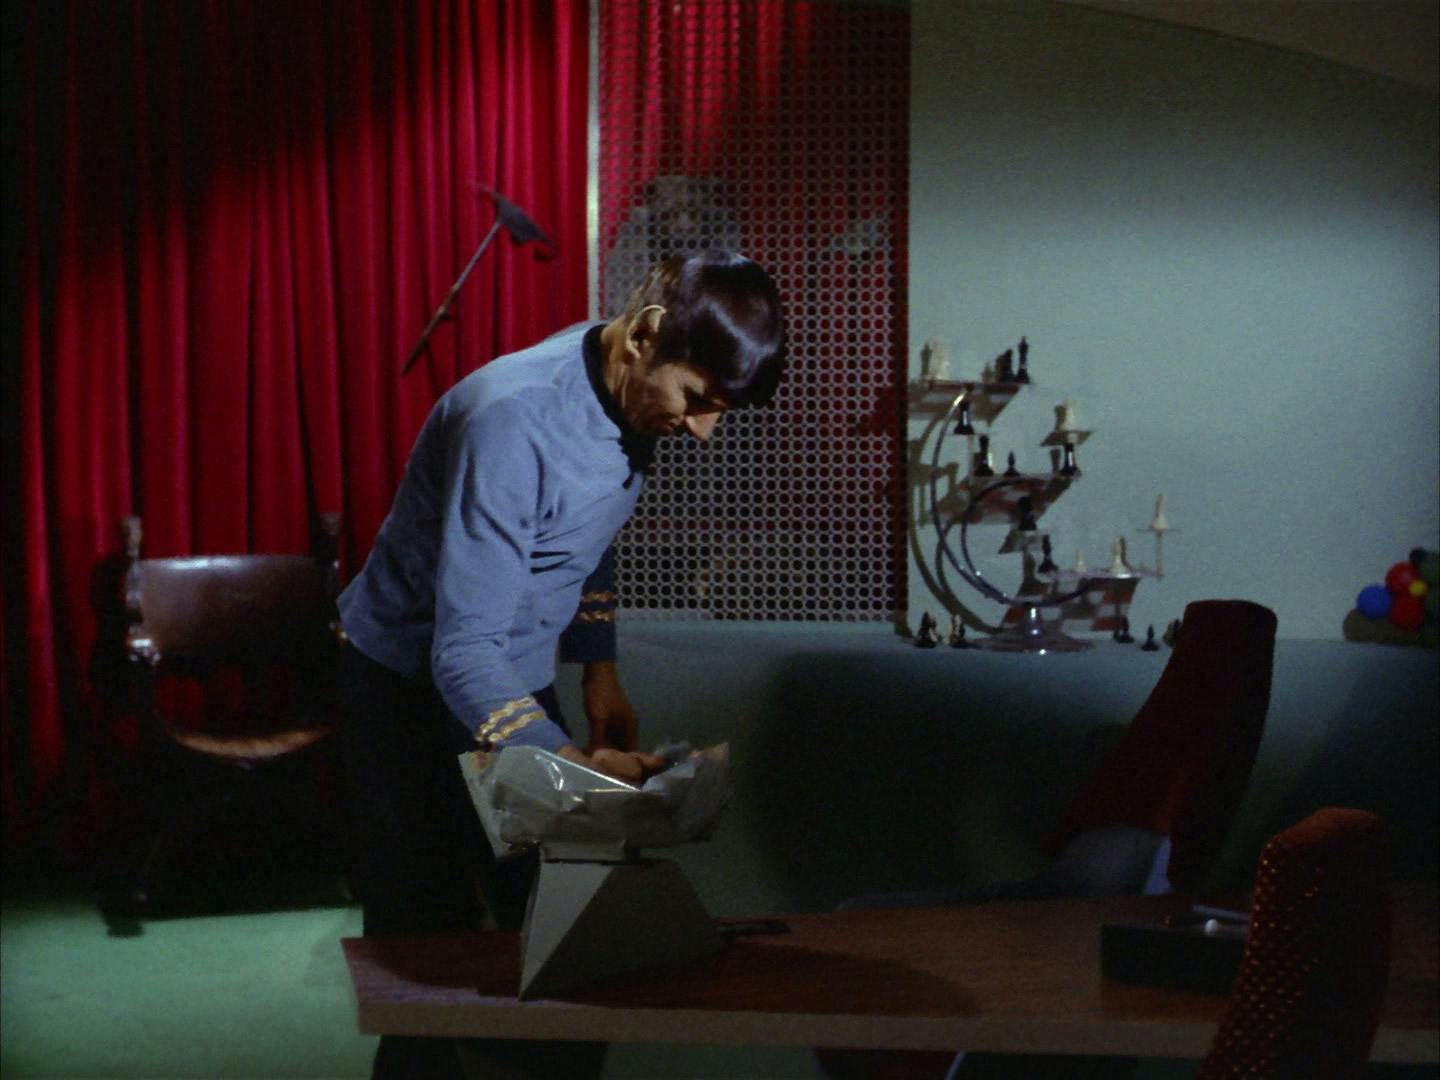 Overcome with intense urges from pon farr, Spock destroys an artifact in his quarters in 'Amok Time'